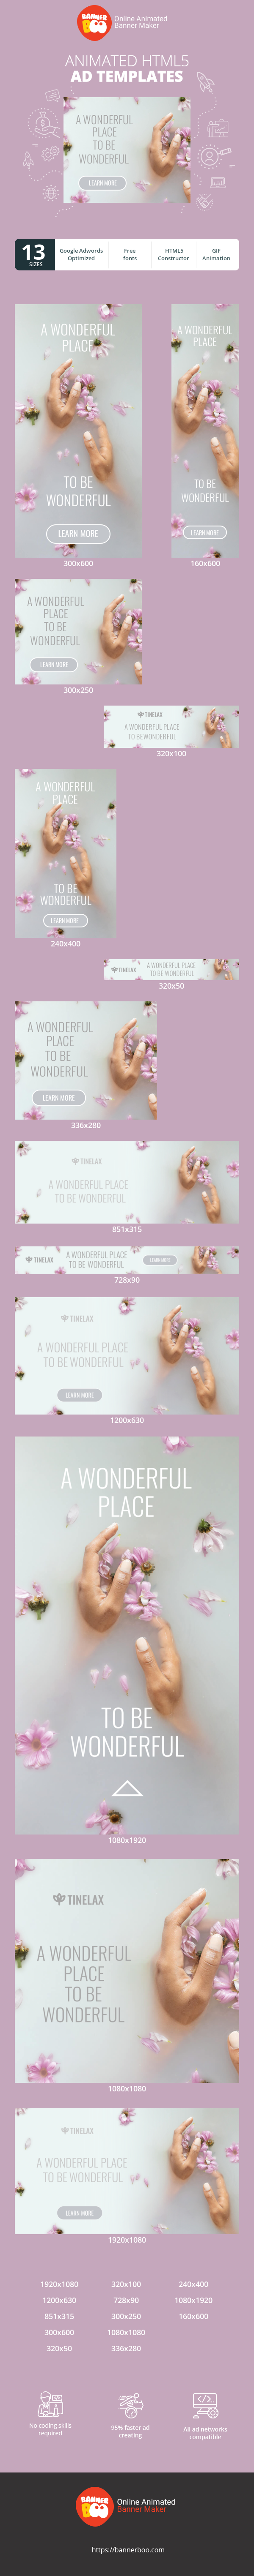 Banner ad template — A Wonderful Place To Be Wonderful — Spa